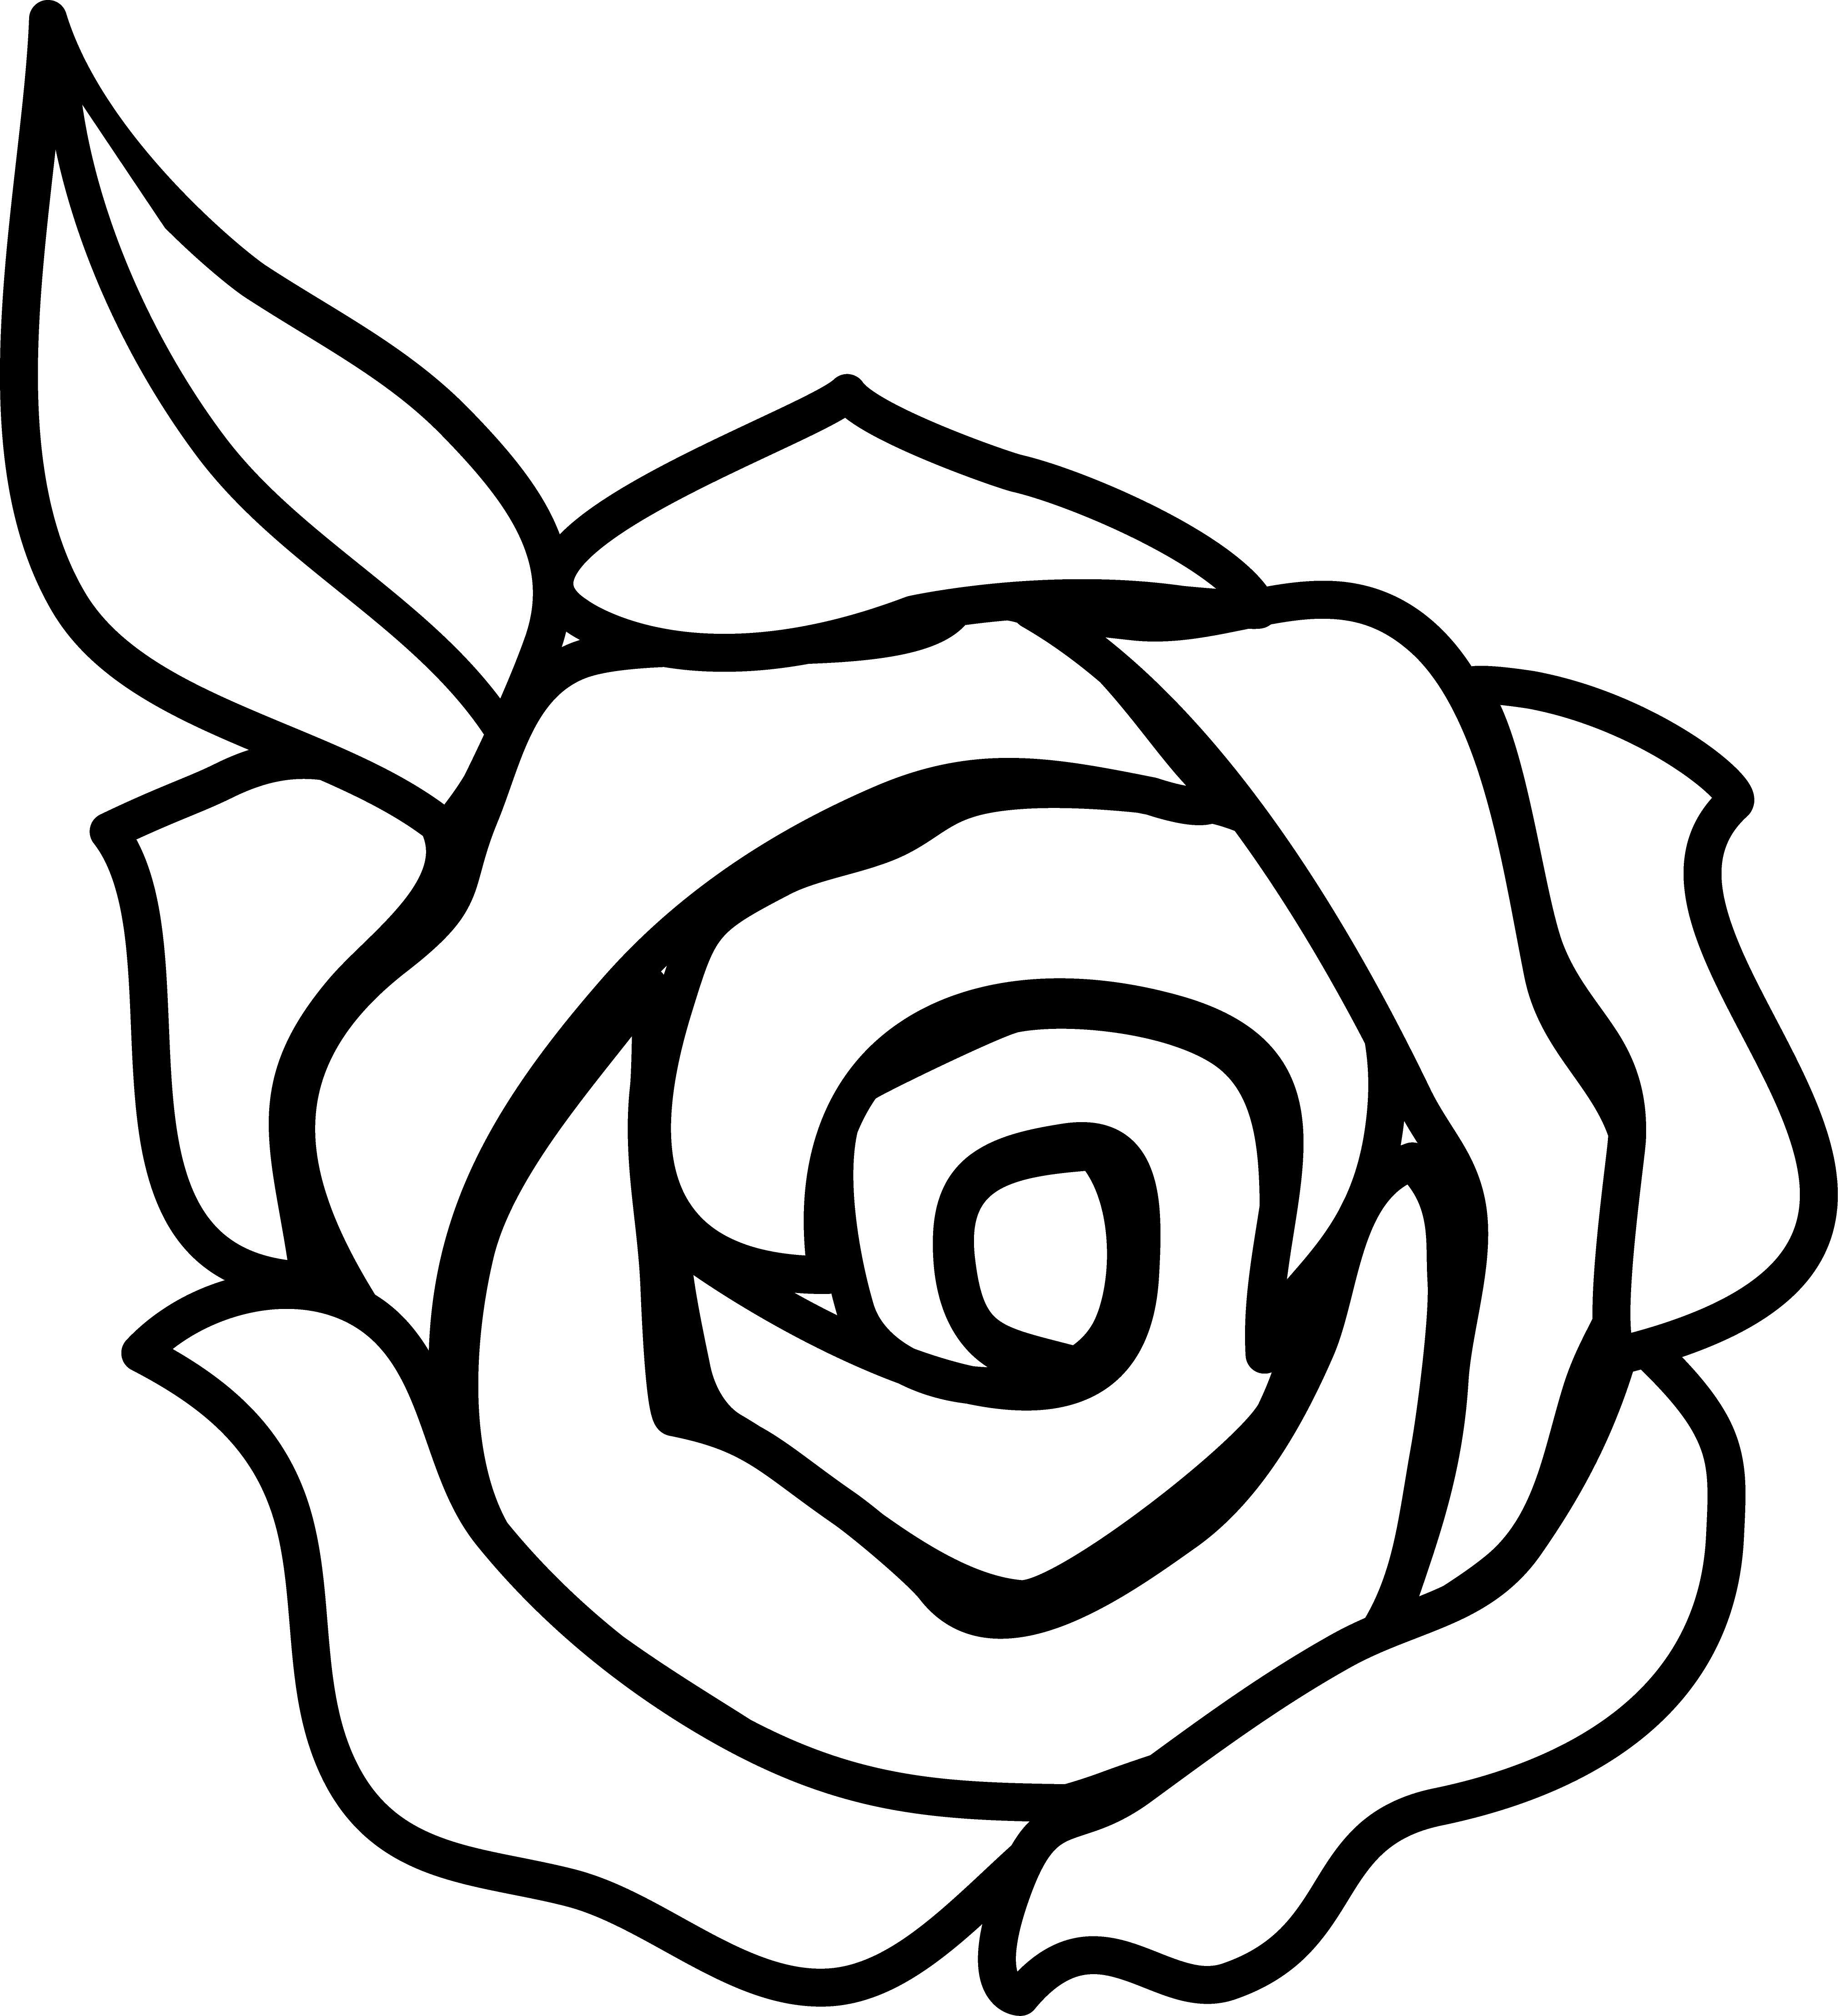 Single red rose clipart - Cli